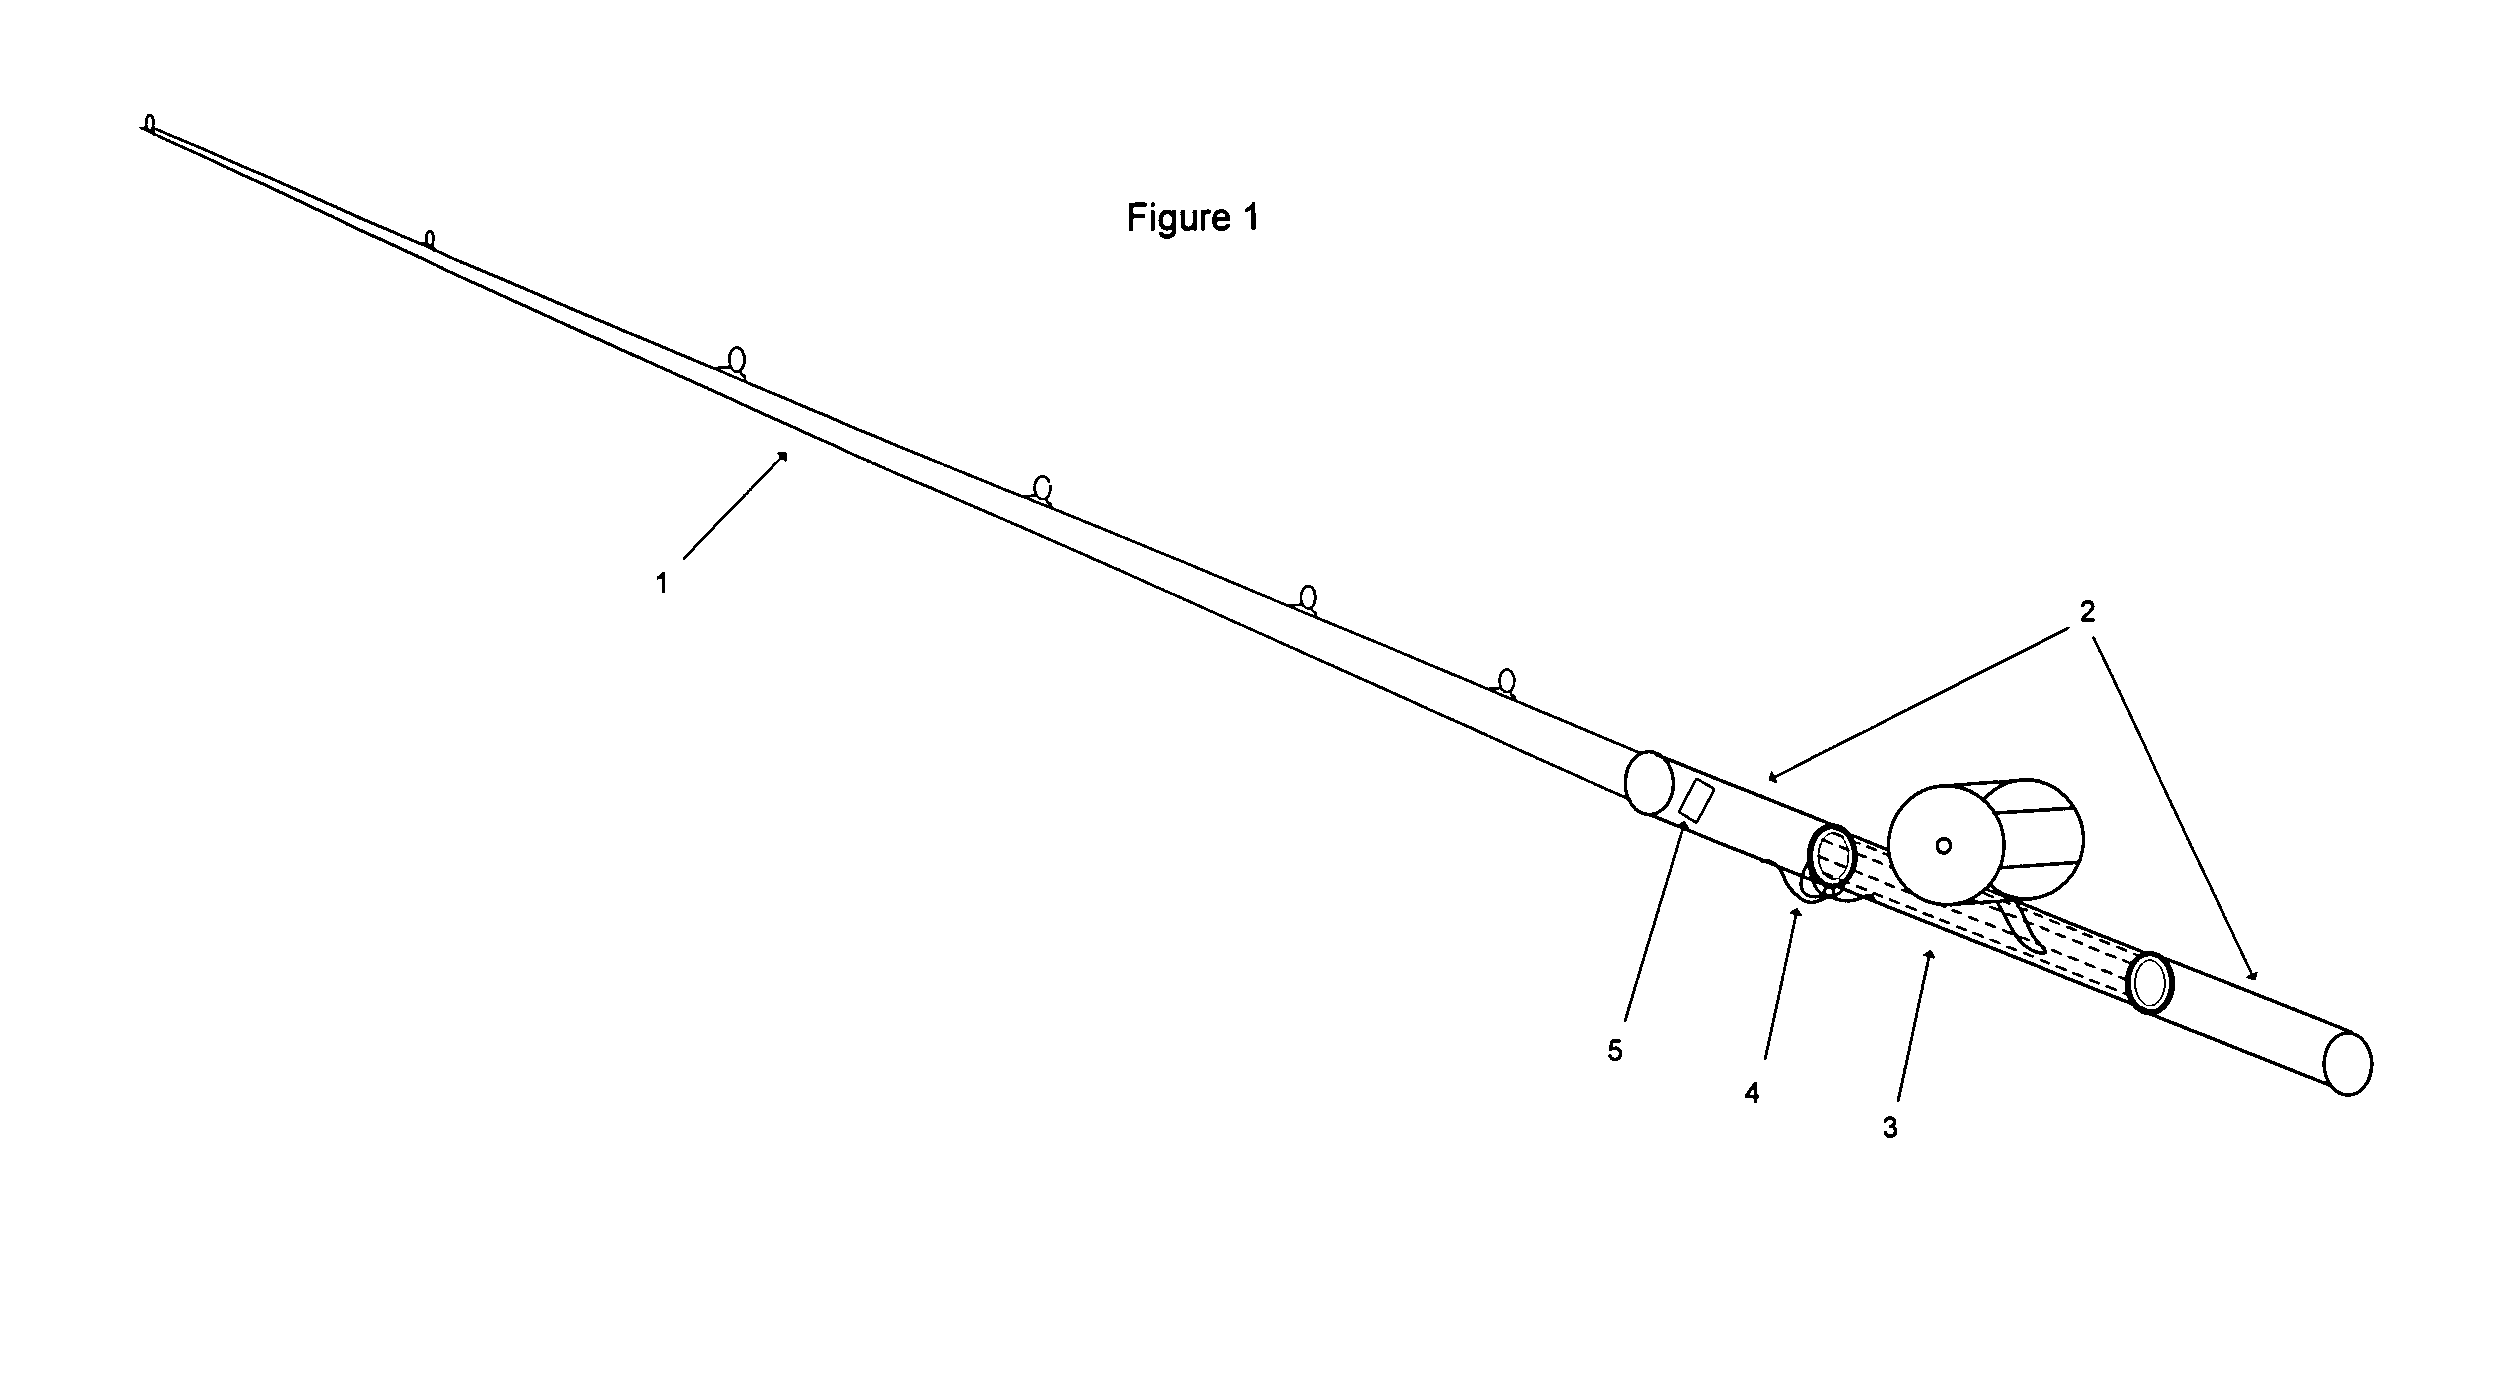 Fishing pole with integrated line tension measuring device